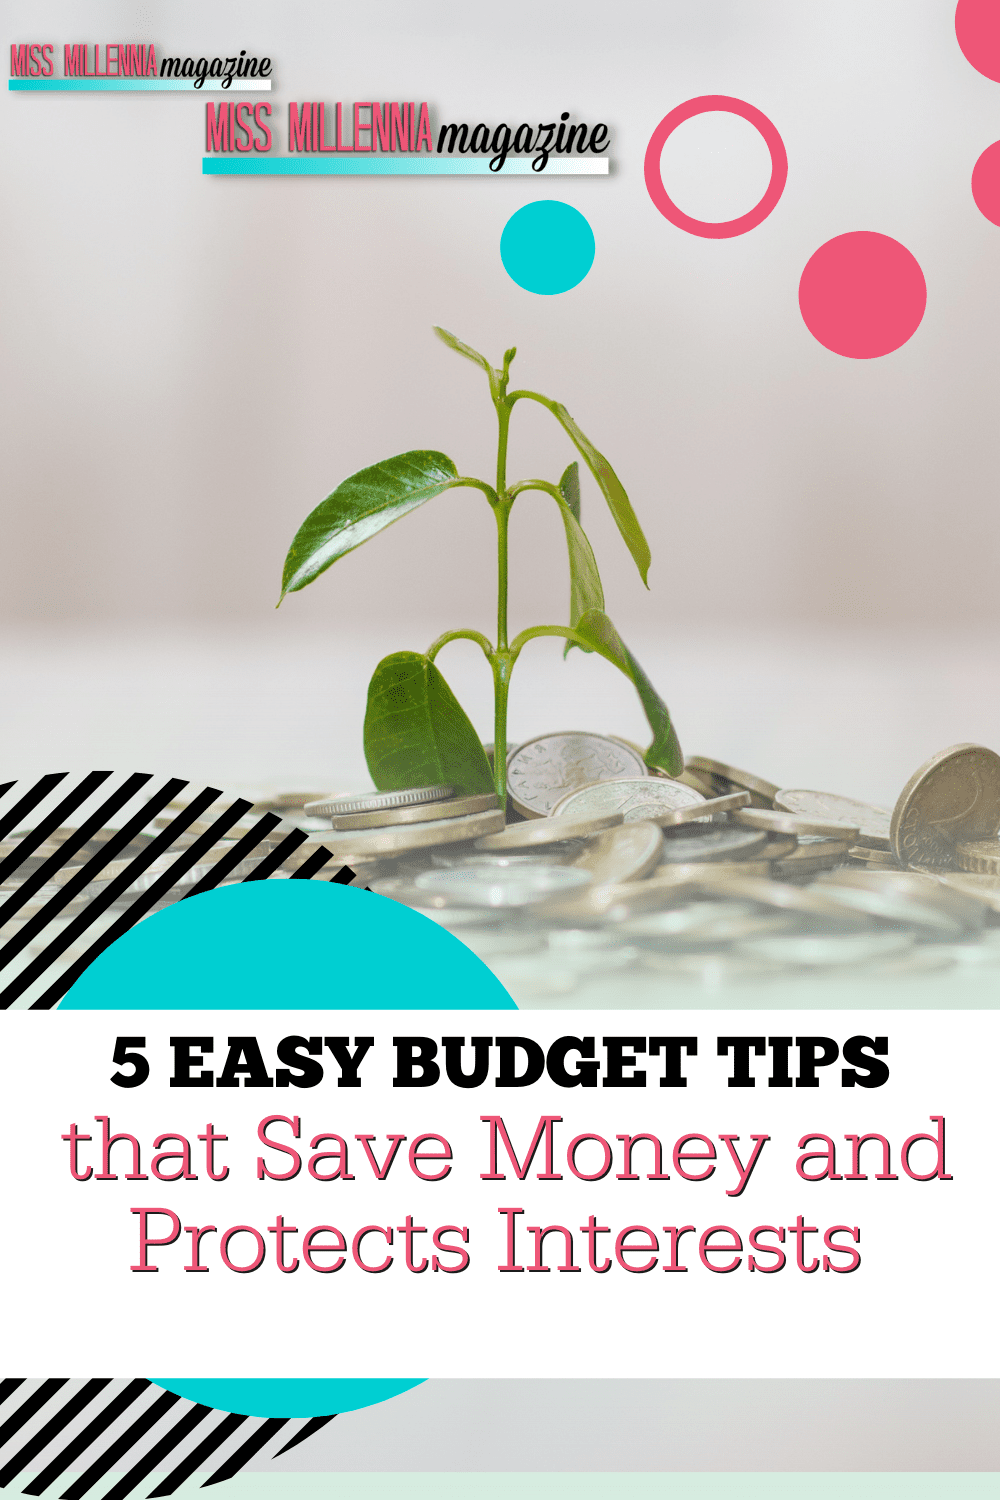 5 Easy Budget Tips that Save Money and Protects Interests